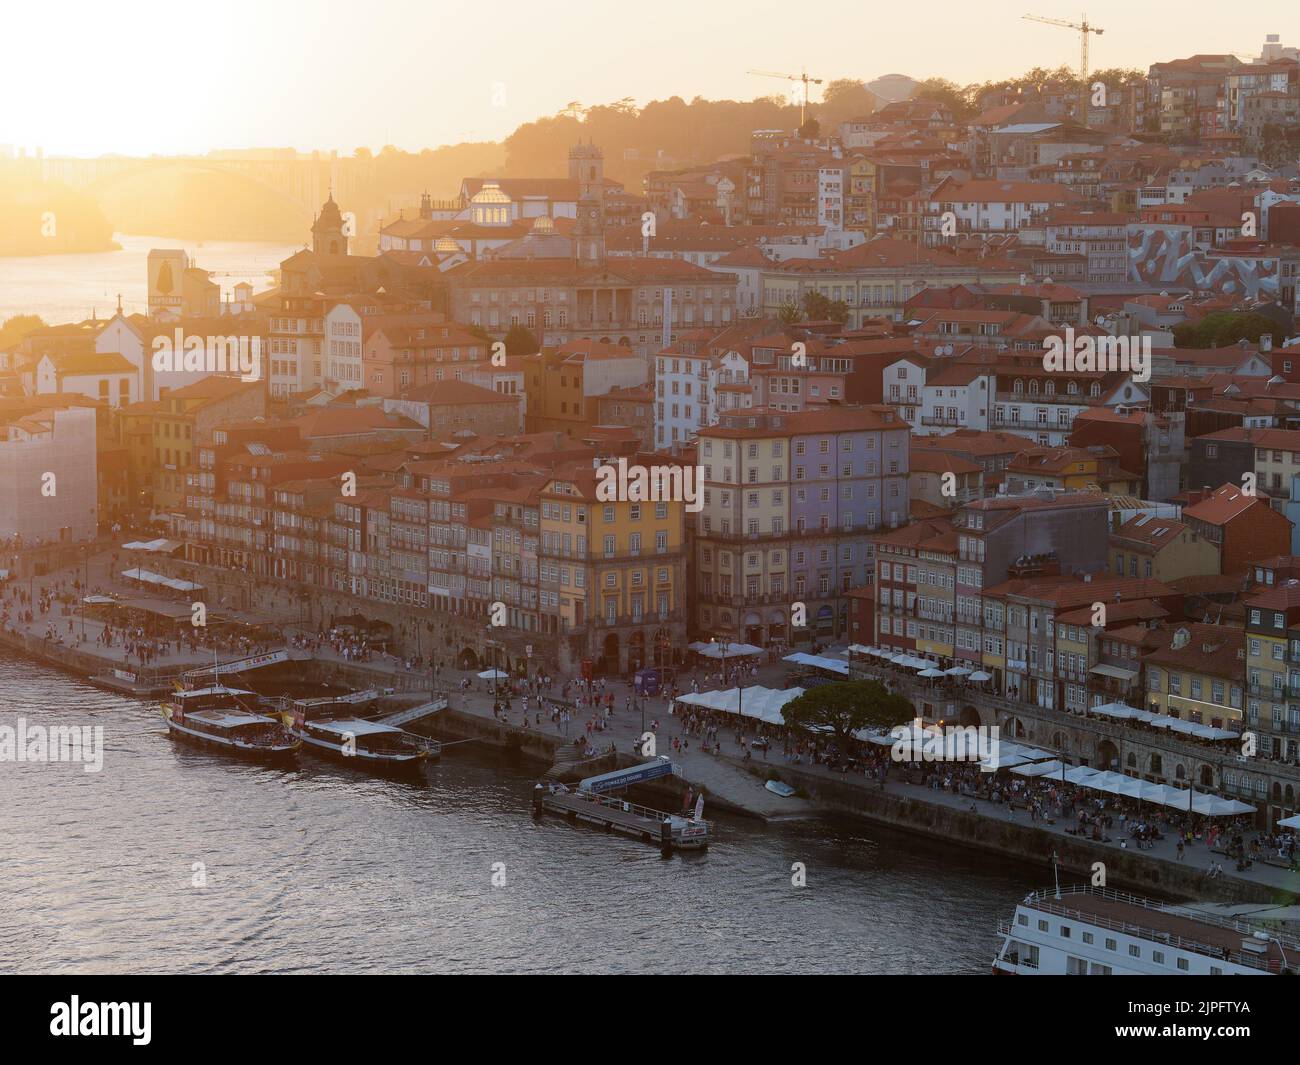 Elevated view of the Ribeira riverfront district and the Douro river in Porto, Portugal. Boats are moored in the harbour. Stock Photo